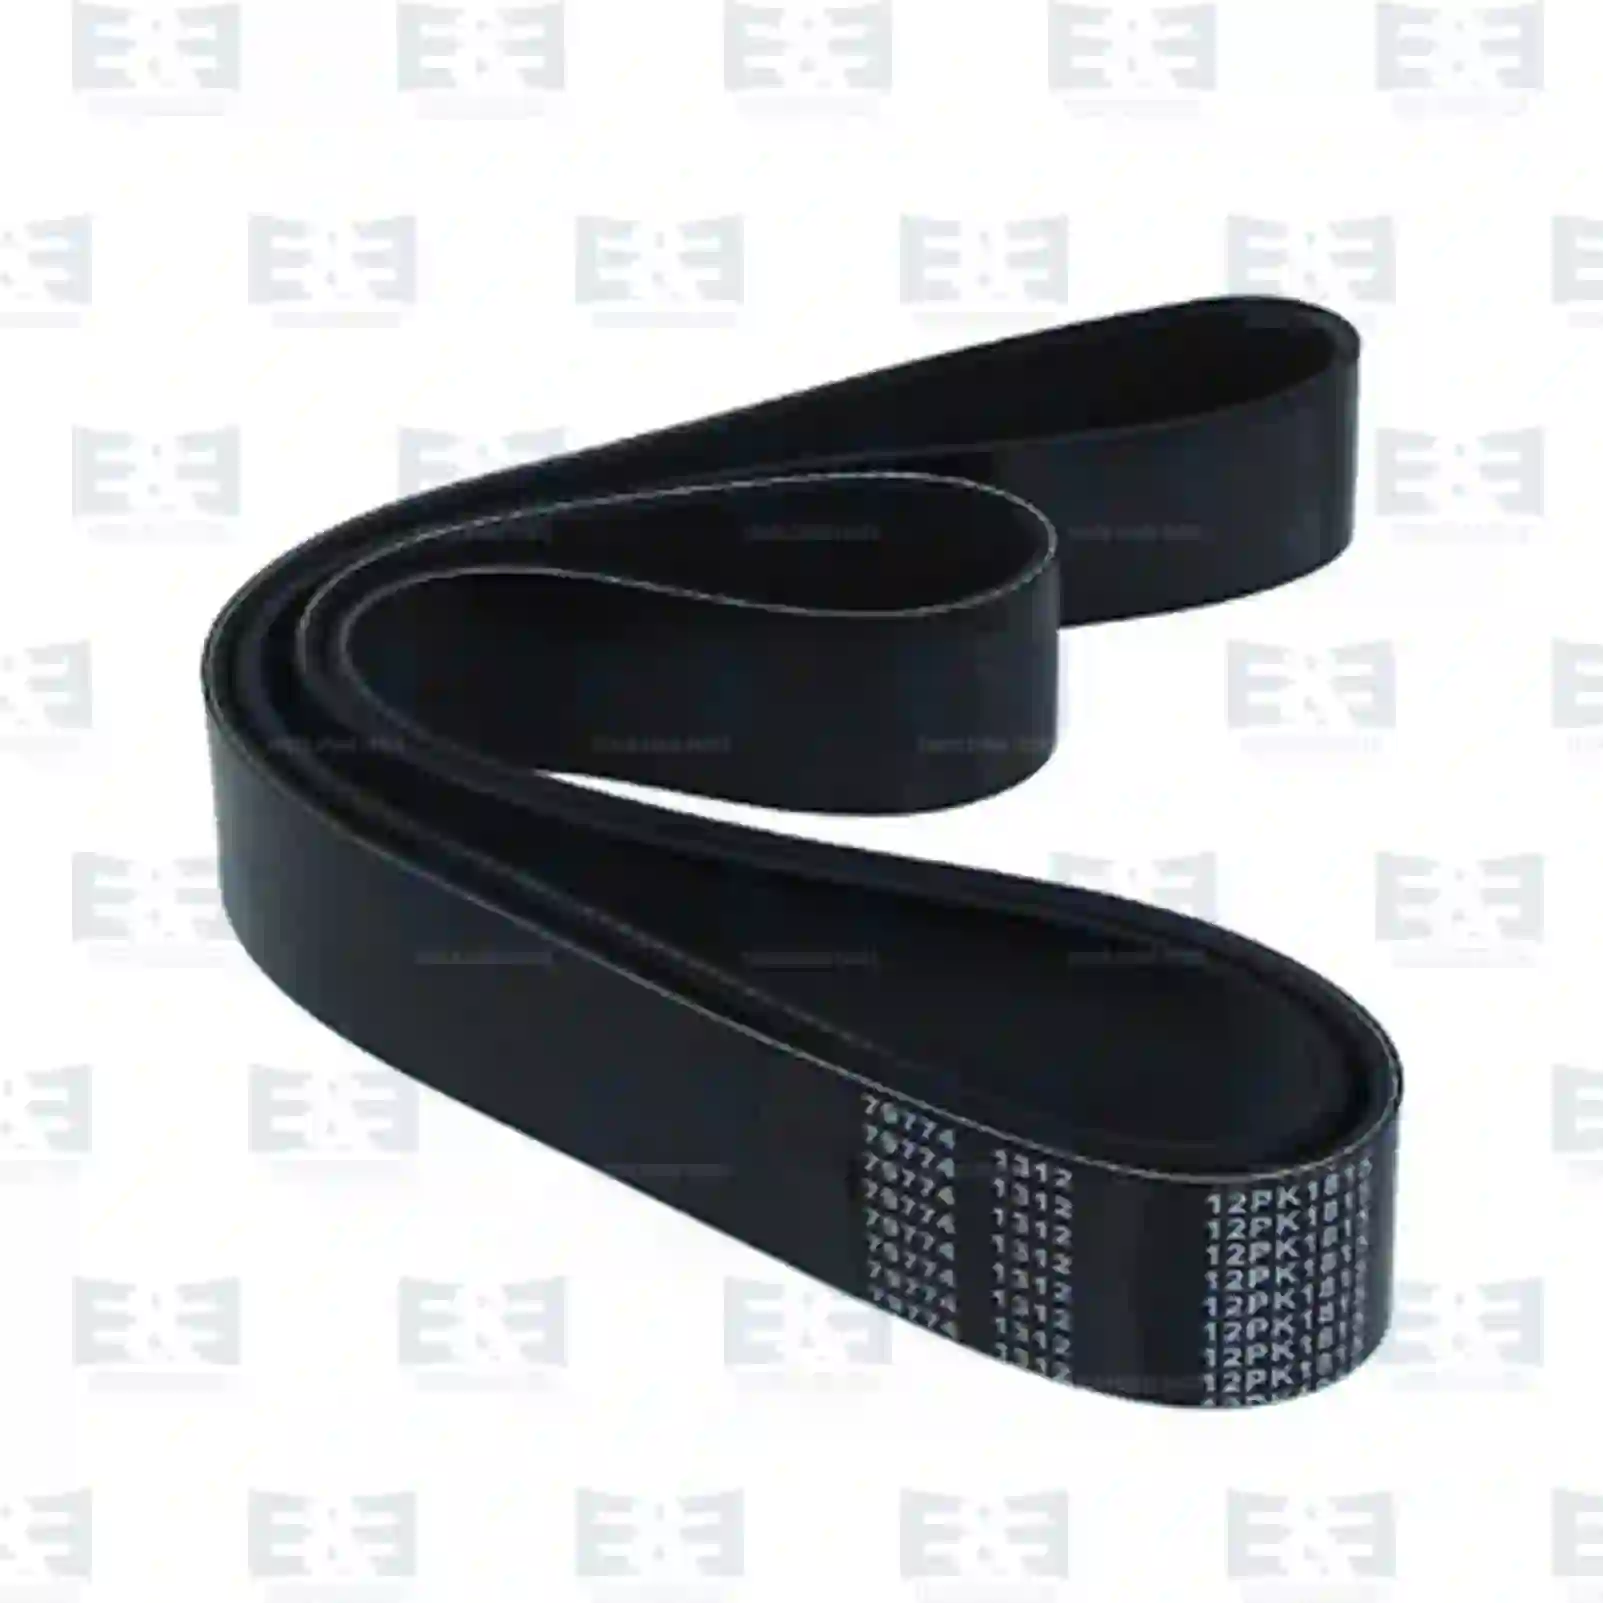 Belts Multiribbed belt, EE No 2E2286511 ,  oem no:3034351, 3199573, 3288922, 3288944, 3290073, 3290125, 3434351, 3903098, 3905867, 3911563, 3911573, 3911573, BF8X-8620-CA, 21140-00Z1B, 7422275092, 7700062268, 1389012, 1389029, 1454281, 1888522, 980481, ZG01419-0008 E&E Truck Spare Parts | Truck Spare Parts, Auotomotive Spare Parts